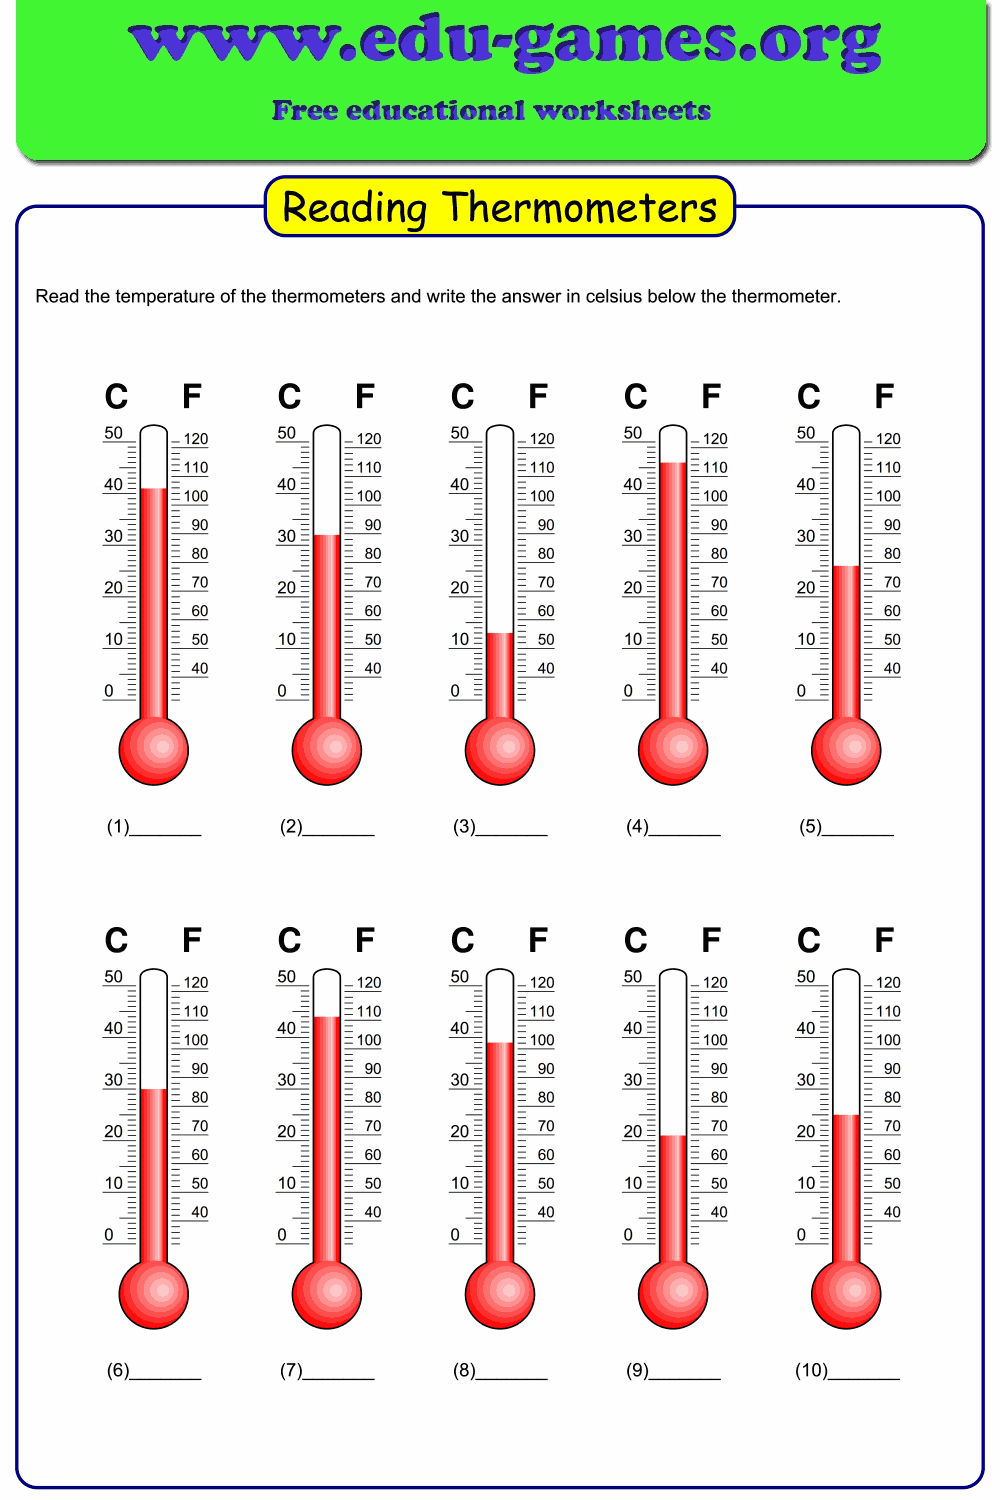 reading-a-thermometer-worksheet-course-mathematics-class-5-topic-temperature-thermometers